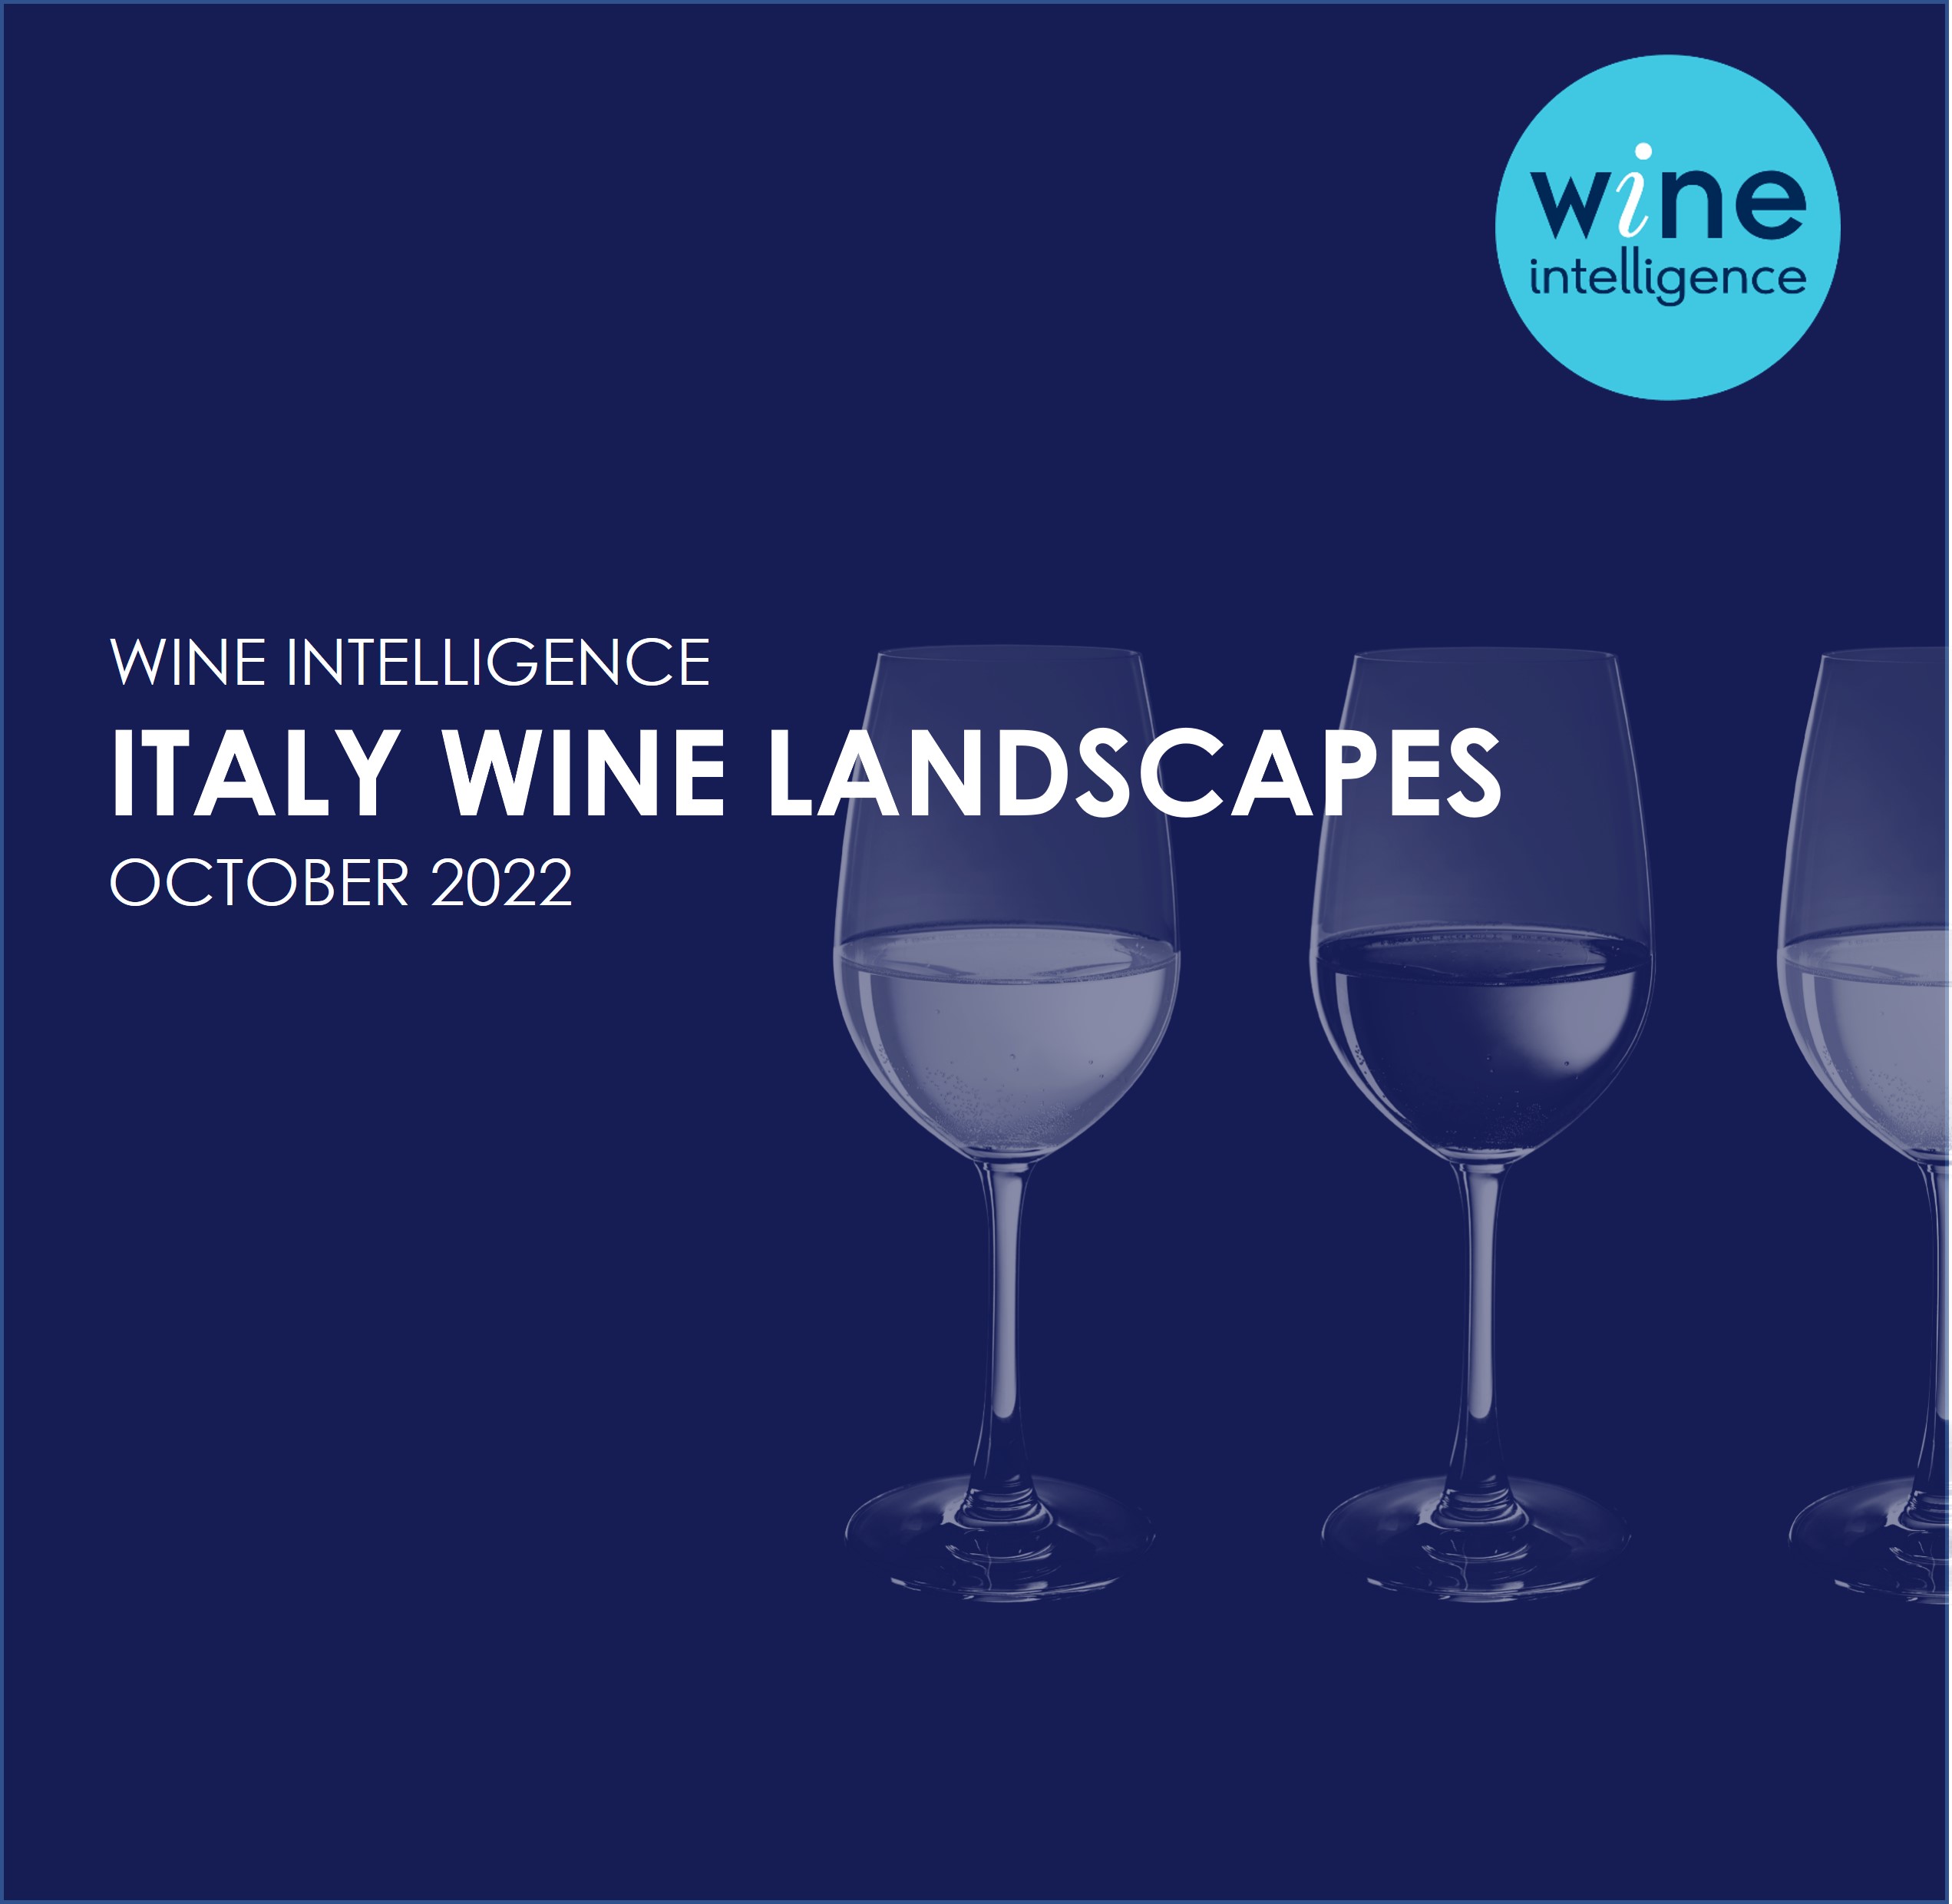 Italy wine landscapes report 2022 - Italy Wine Landscapes Report 2022